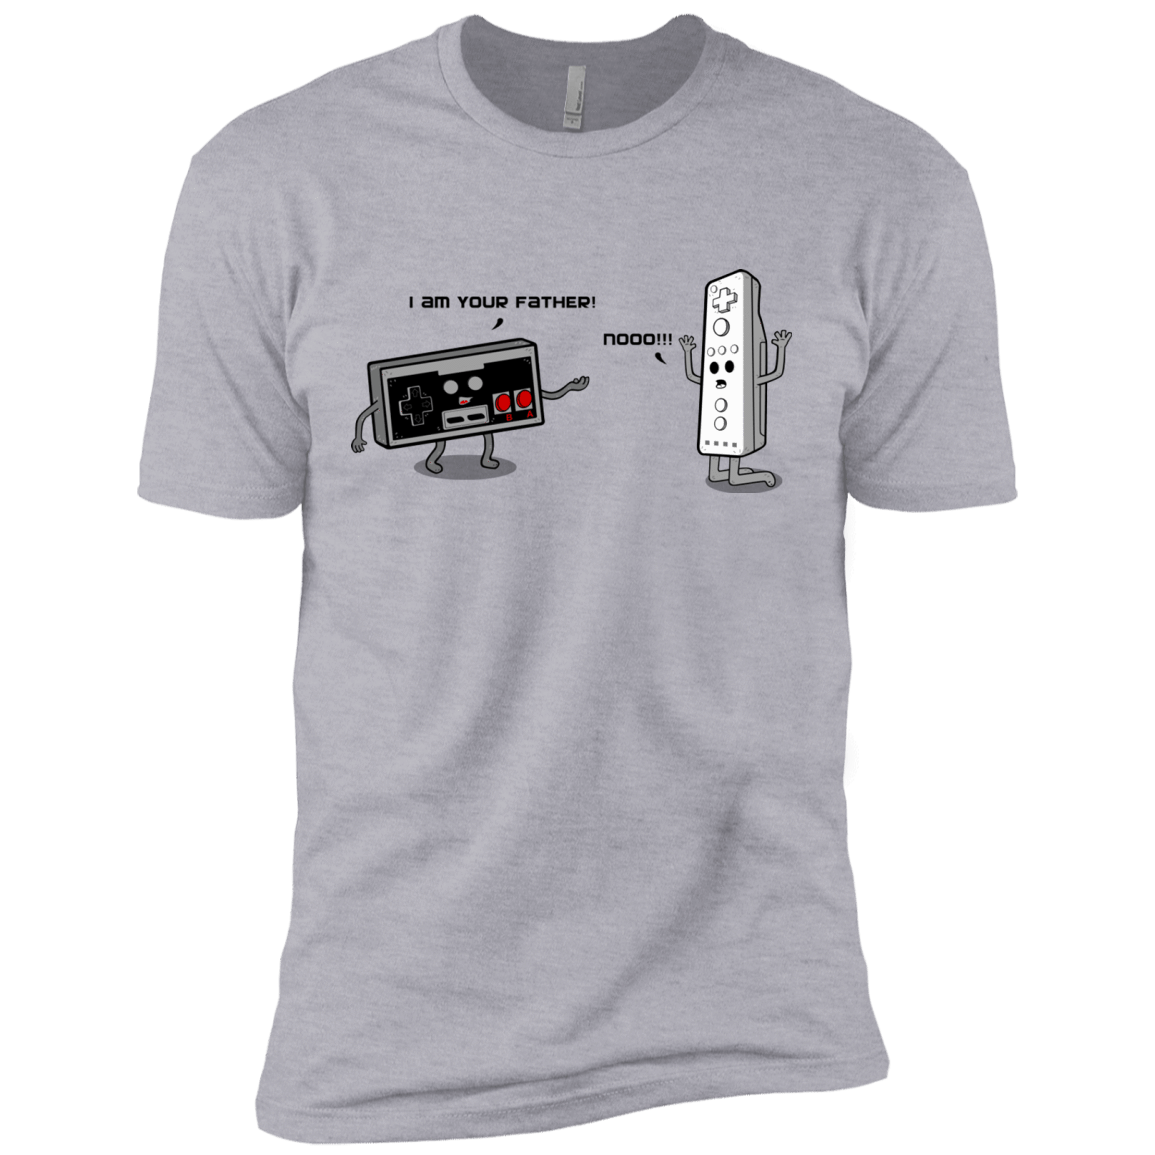 T-Shirts Heather Grey / X-Small I am your father NES Men's Premium T-Shirt